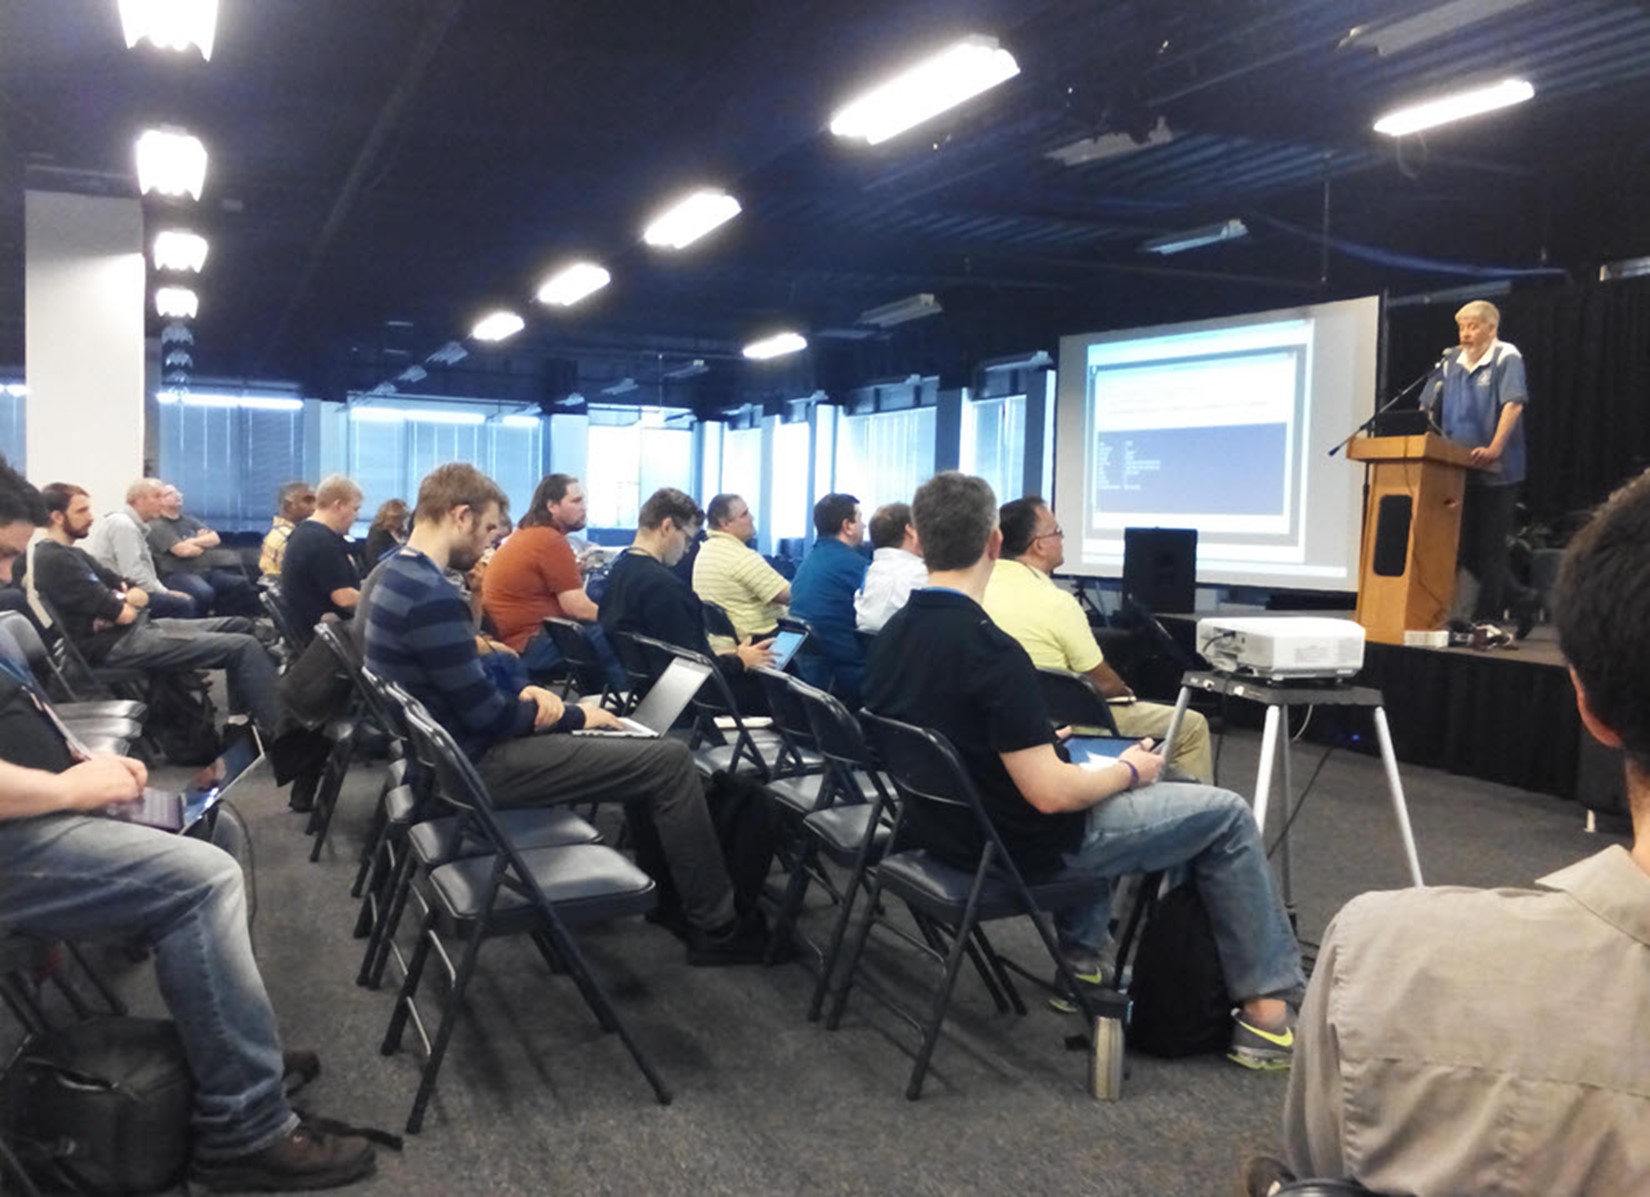 Richard Siddaway spreading the word about OMI and PowerShell. (Image Credit: Jeff Hicks)